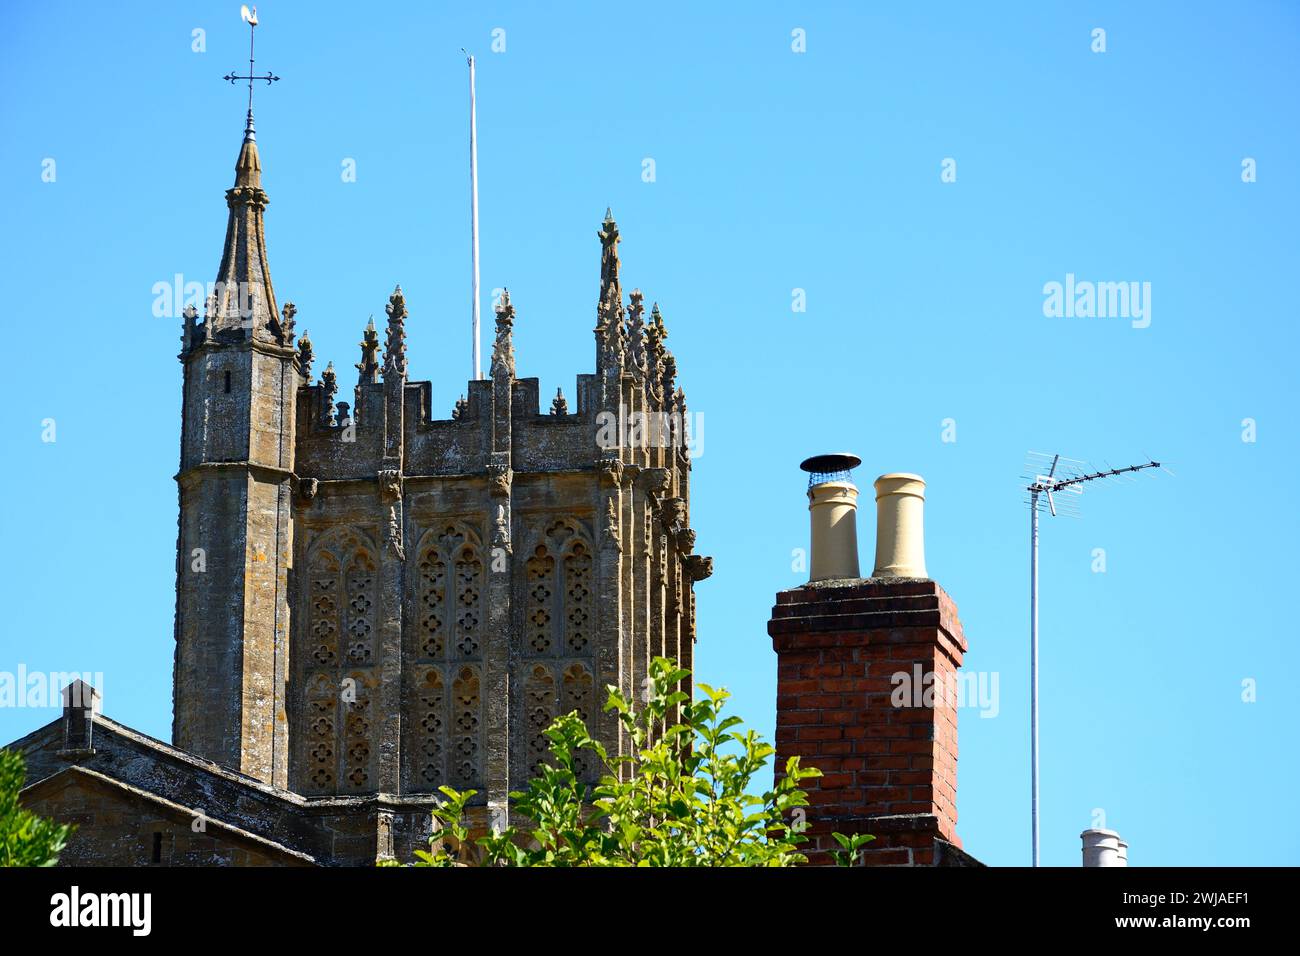 View of the minster tower and a traditional brick chimney, Ilminster, Somerset, UK, Europe Stock Photo